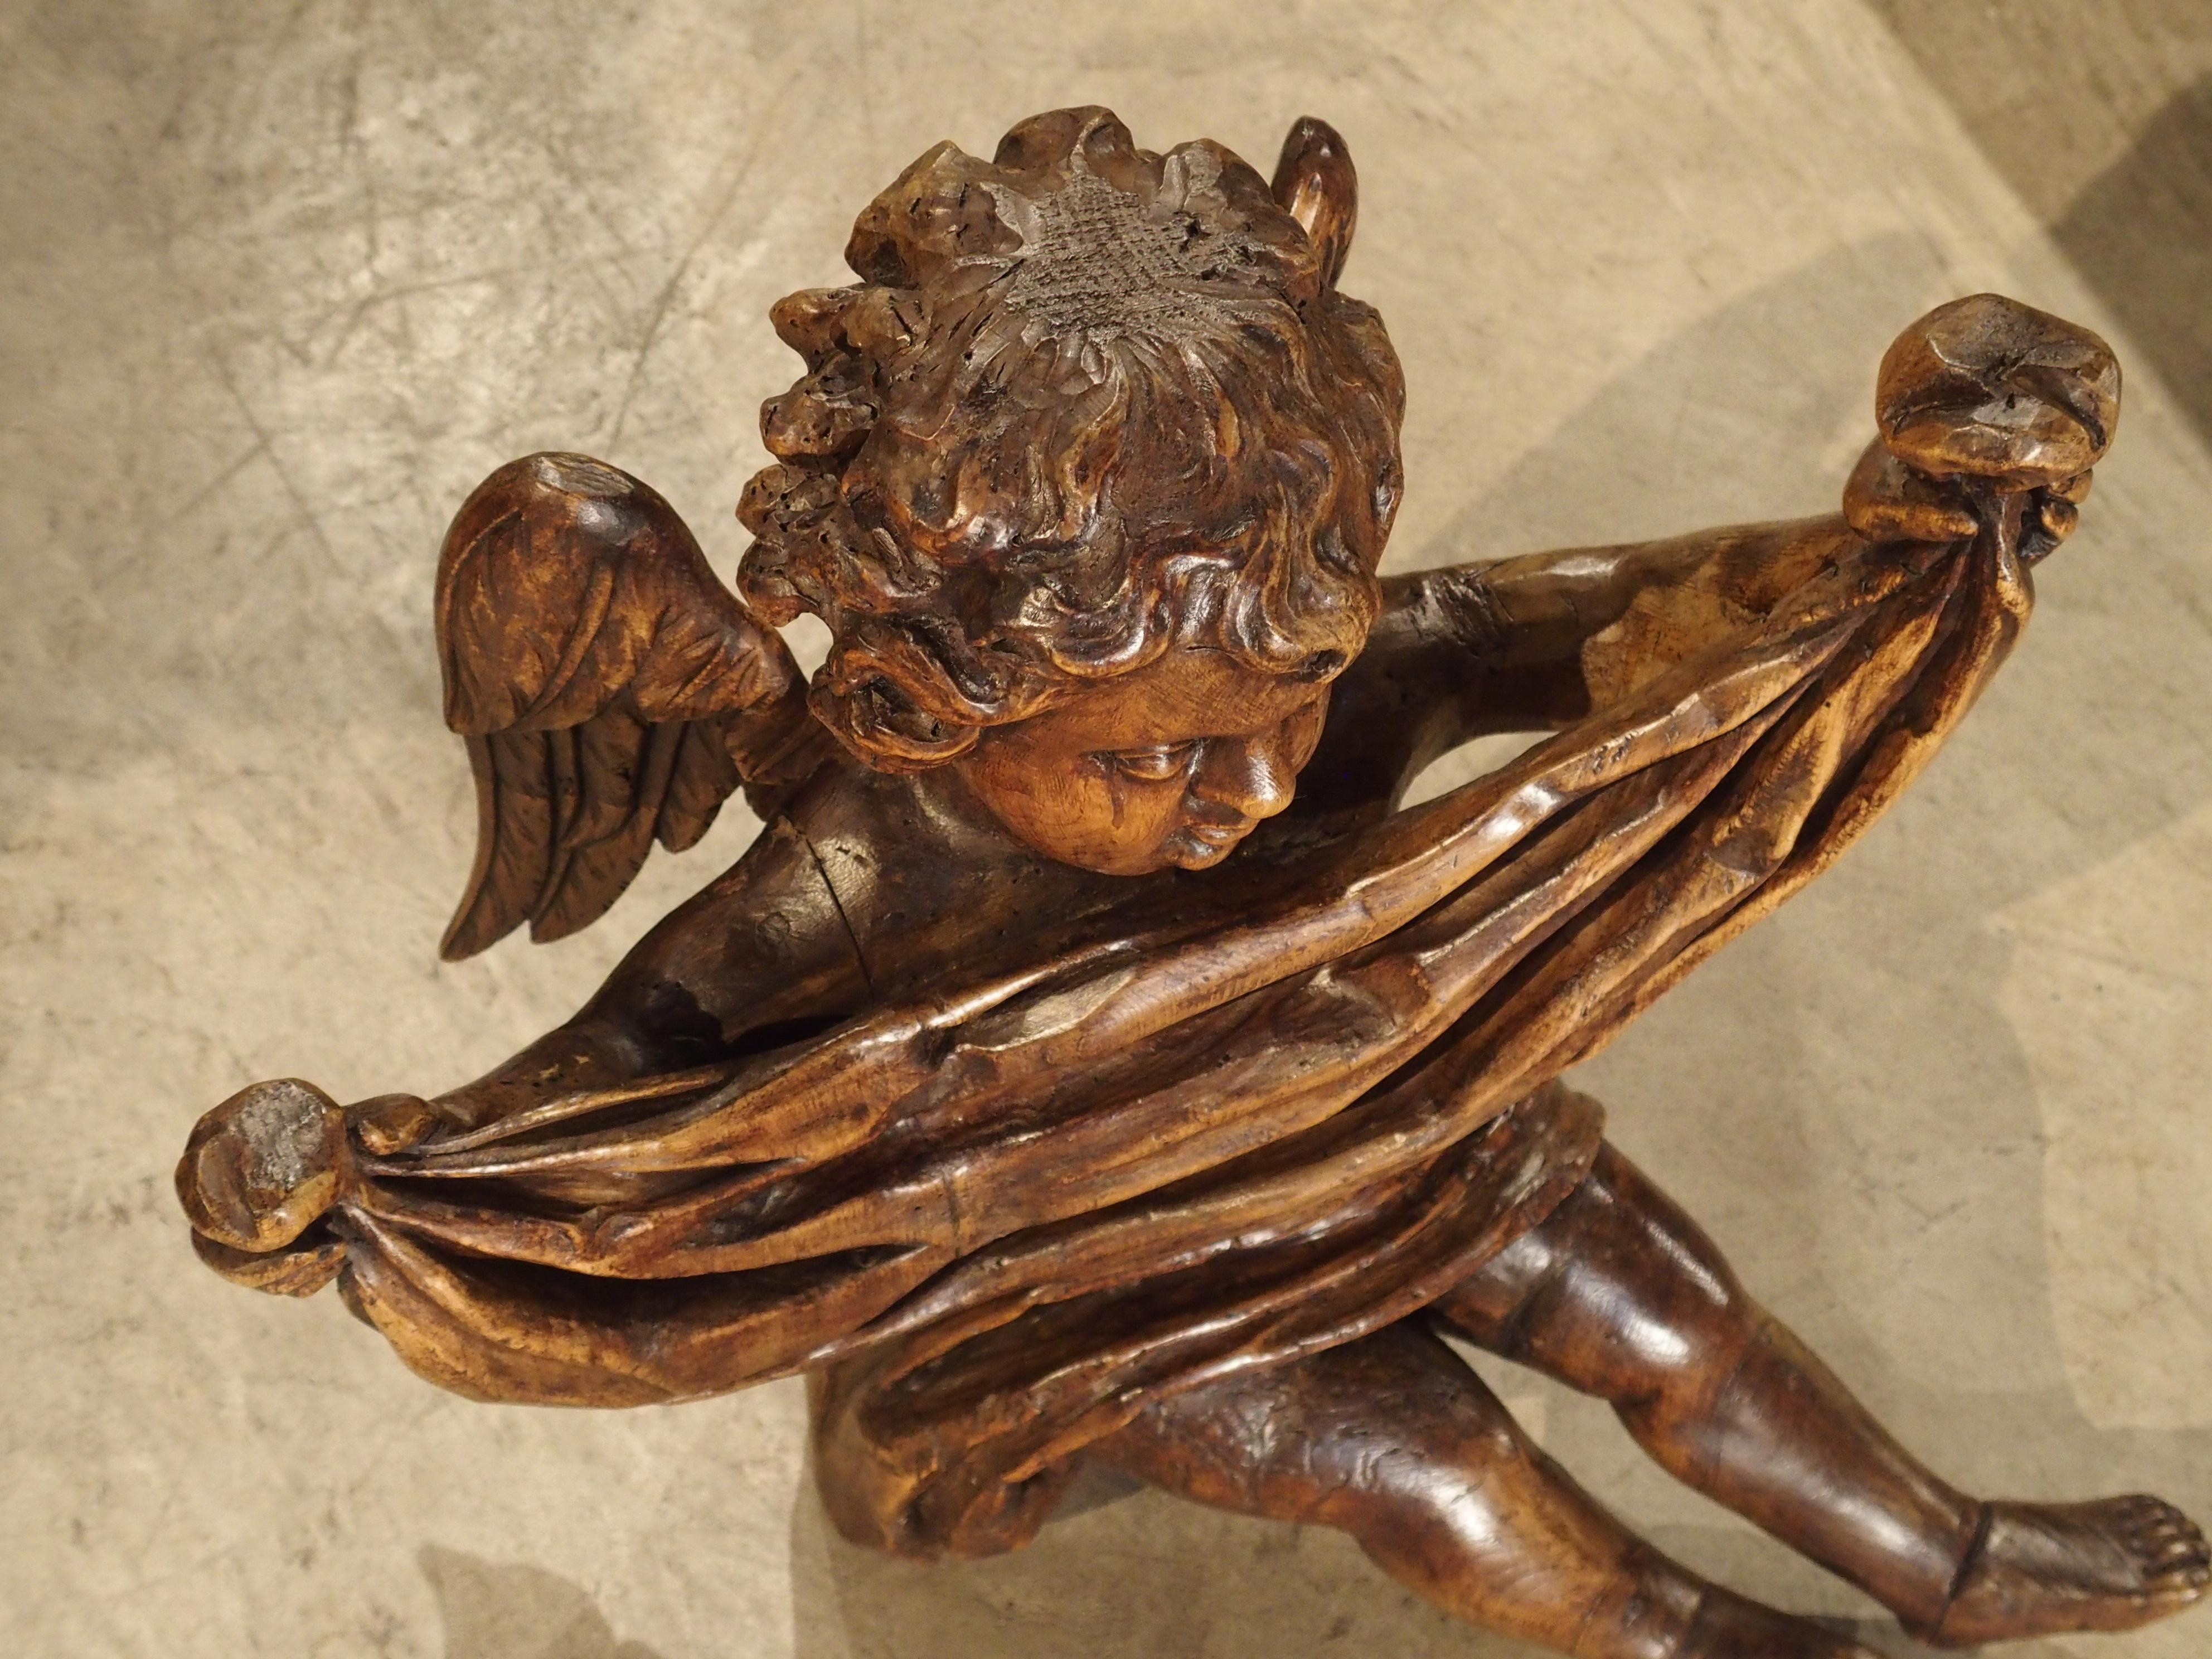 Hand-Carved Antique Carved Wooden Cherub from Puy-en-Velay France, 18th Century